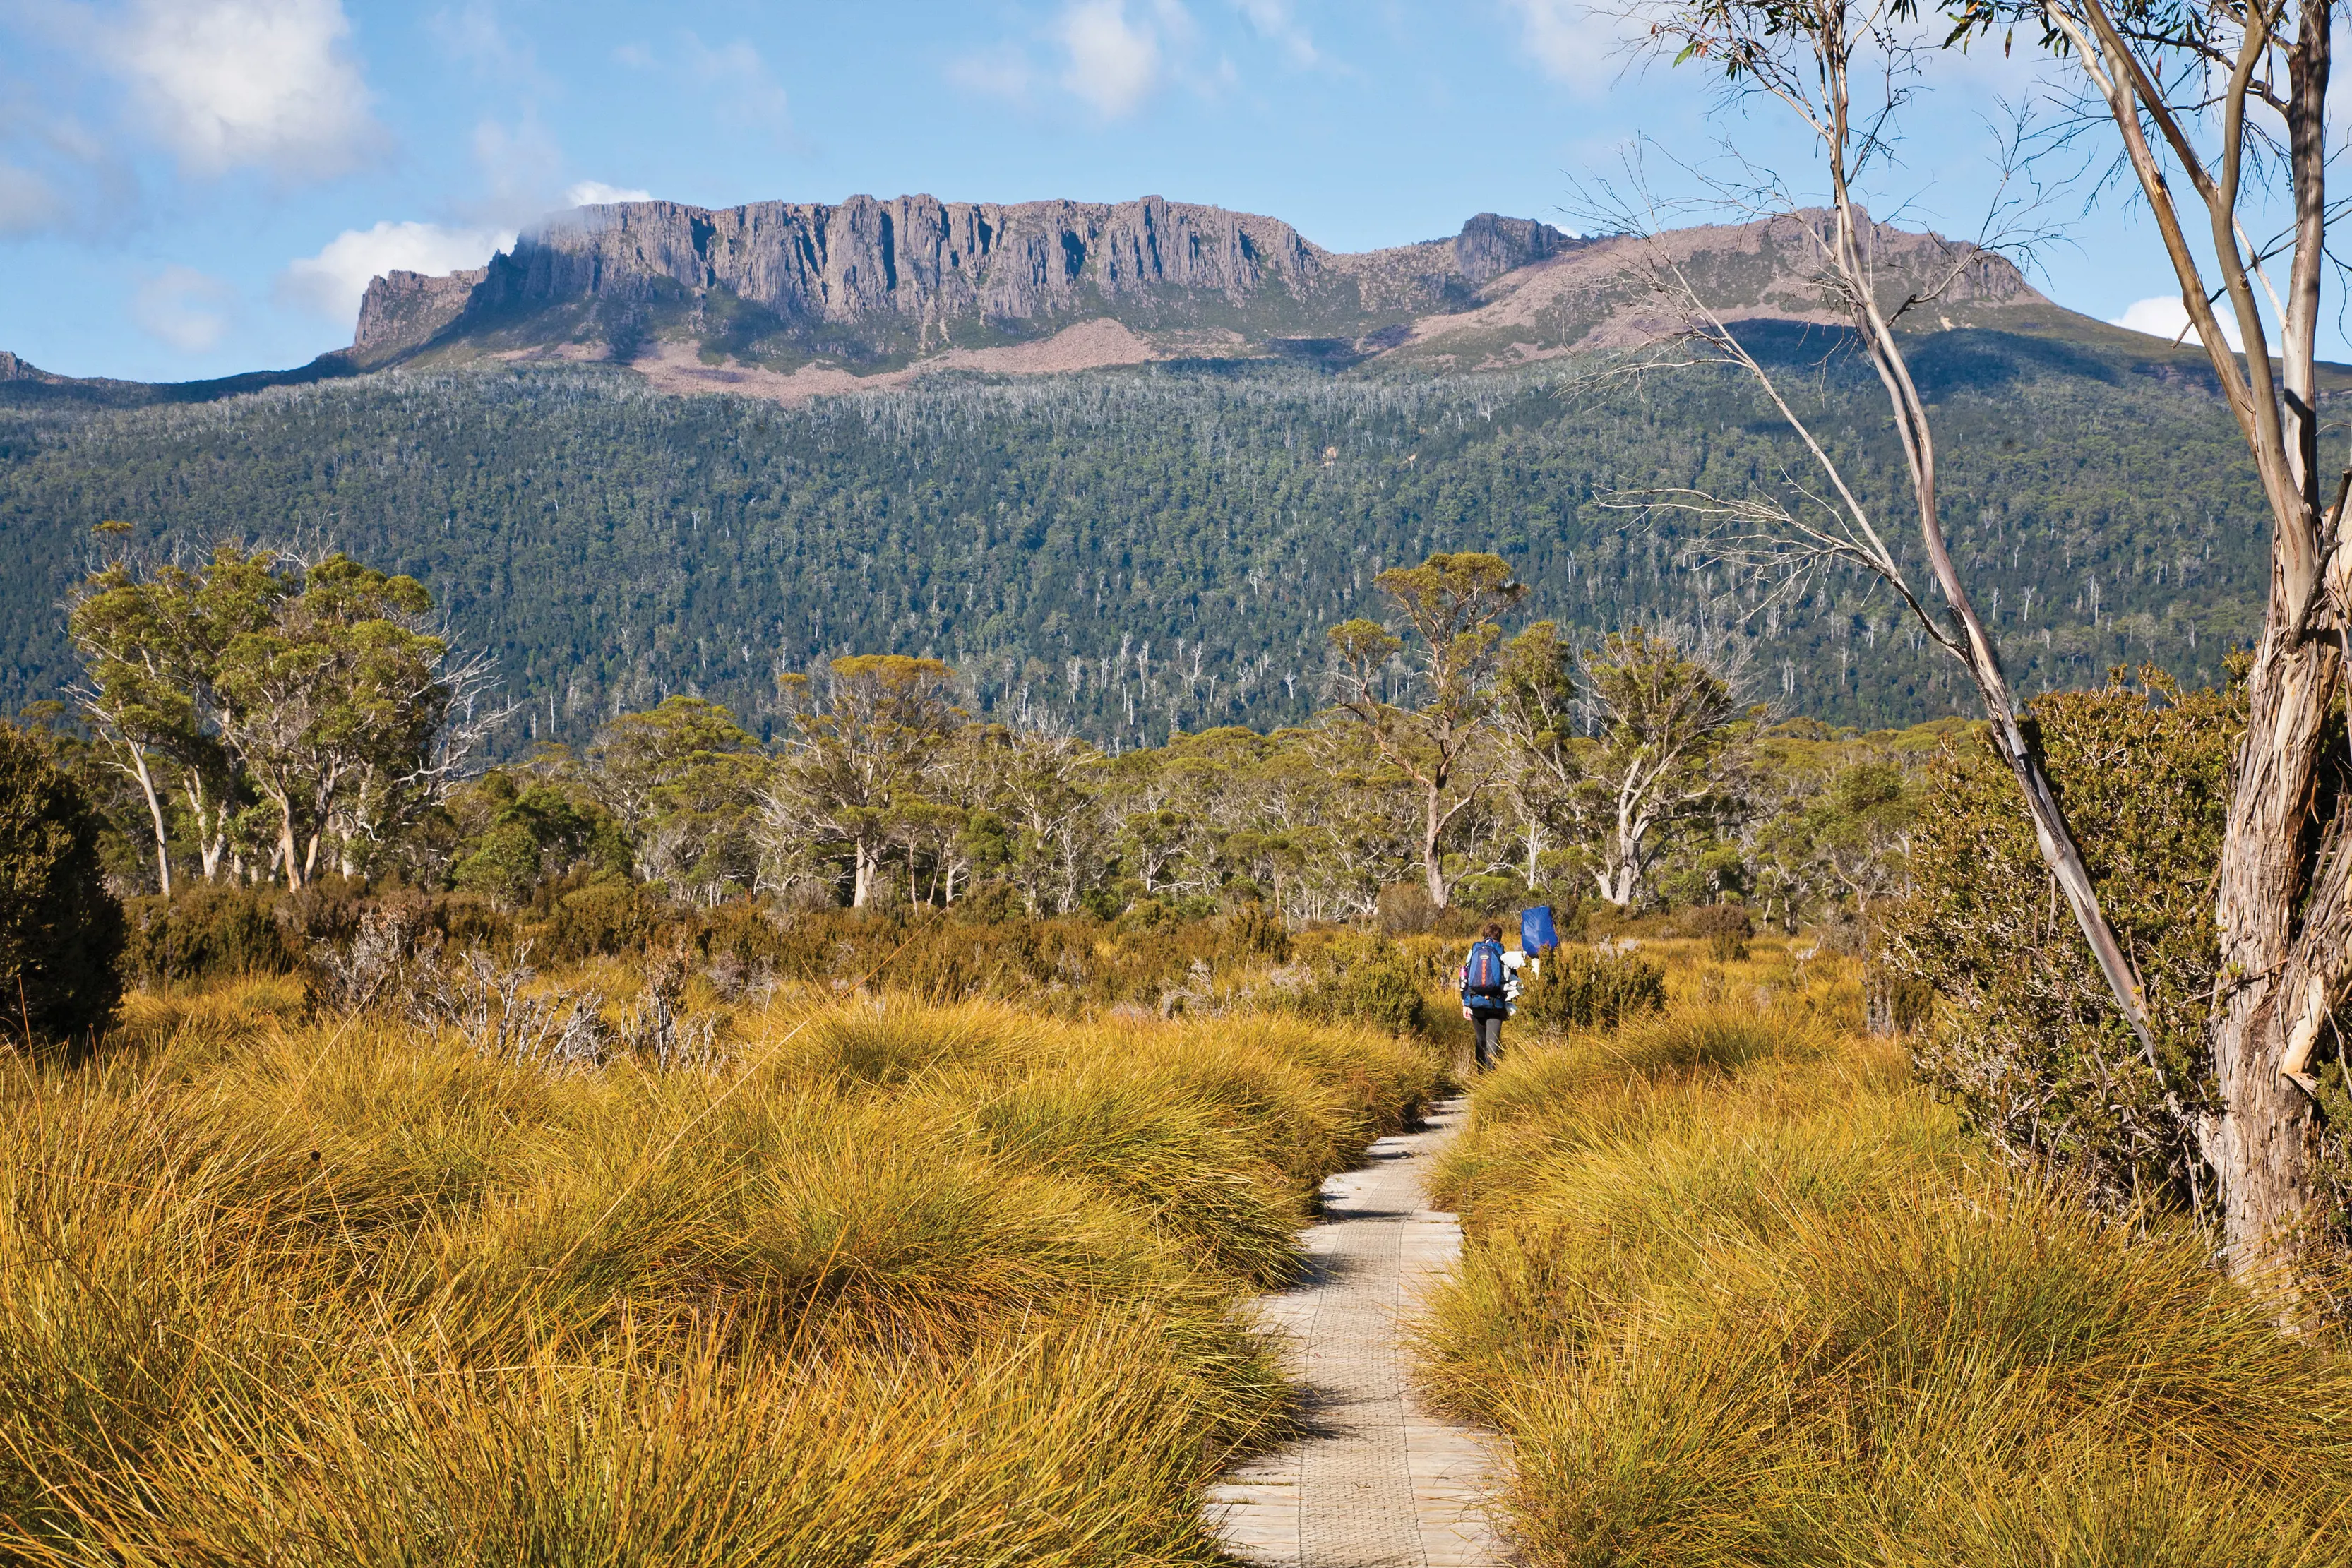 Hikers on the Overland Bushwalking Track, with Mt Olympus in the backdrop